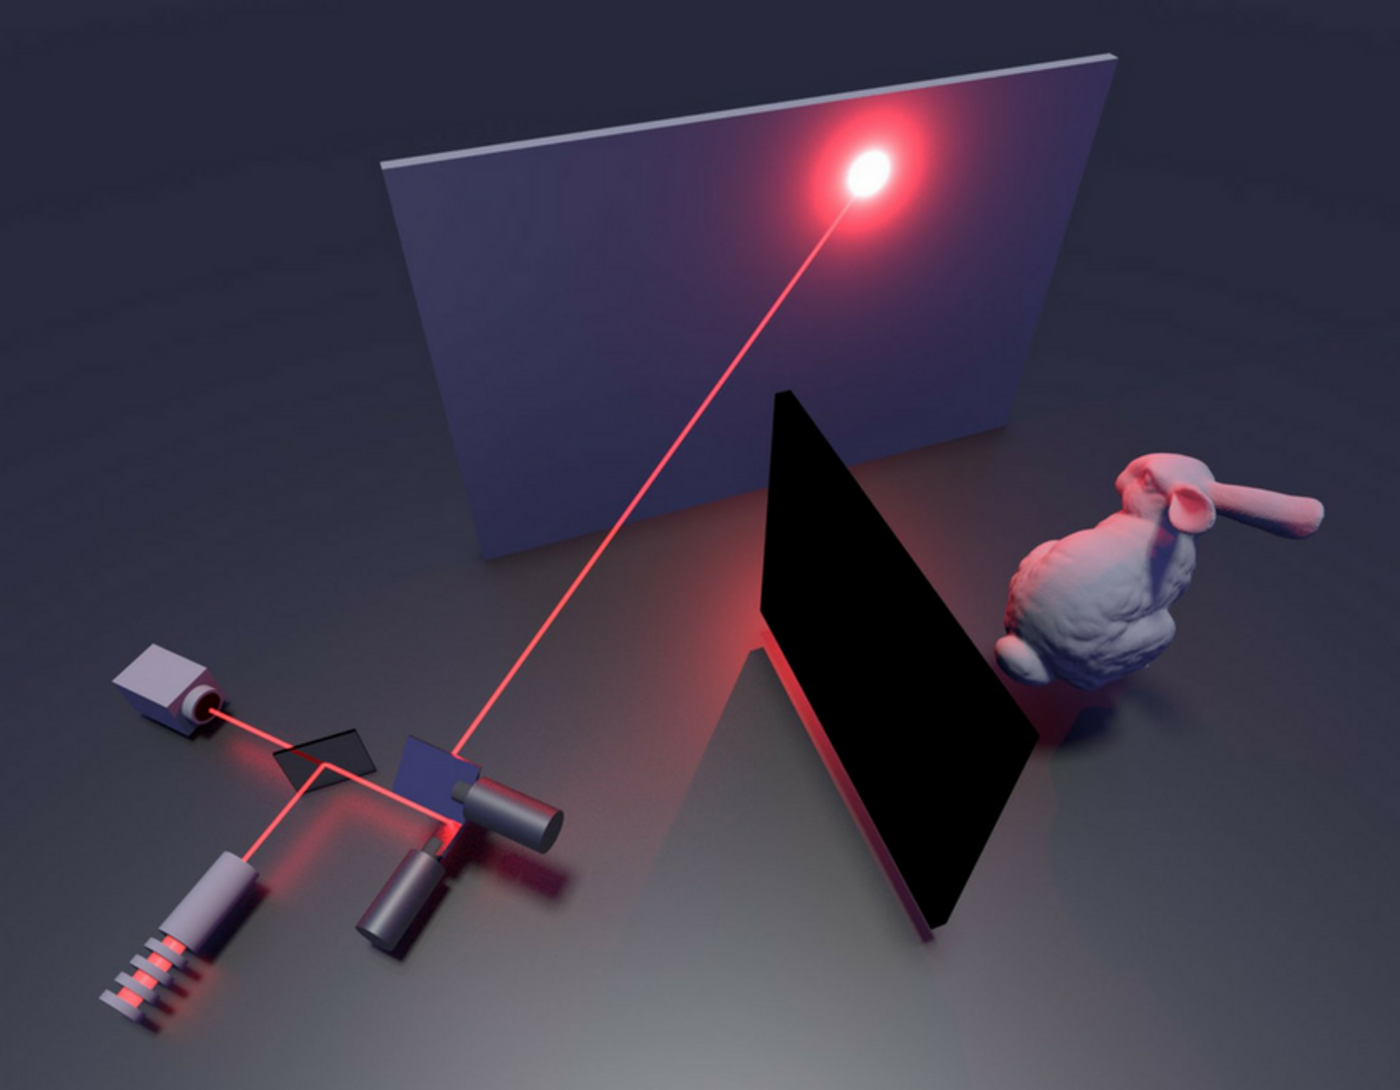  Illustration of the non-line-of-sight imaging system. Credit: Stanford Computational Imaging Lab